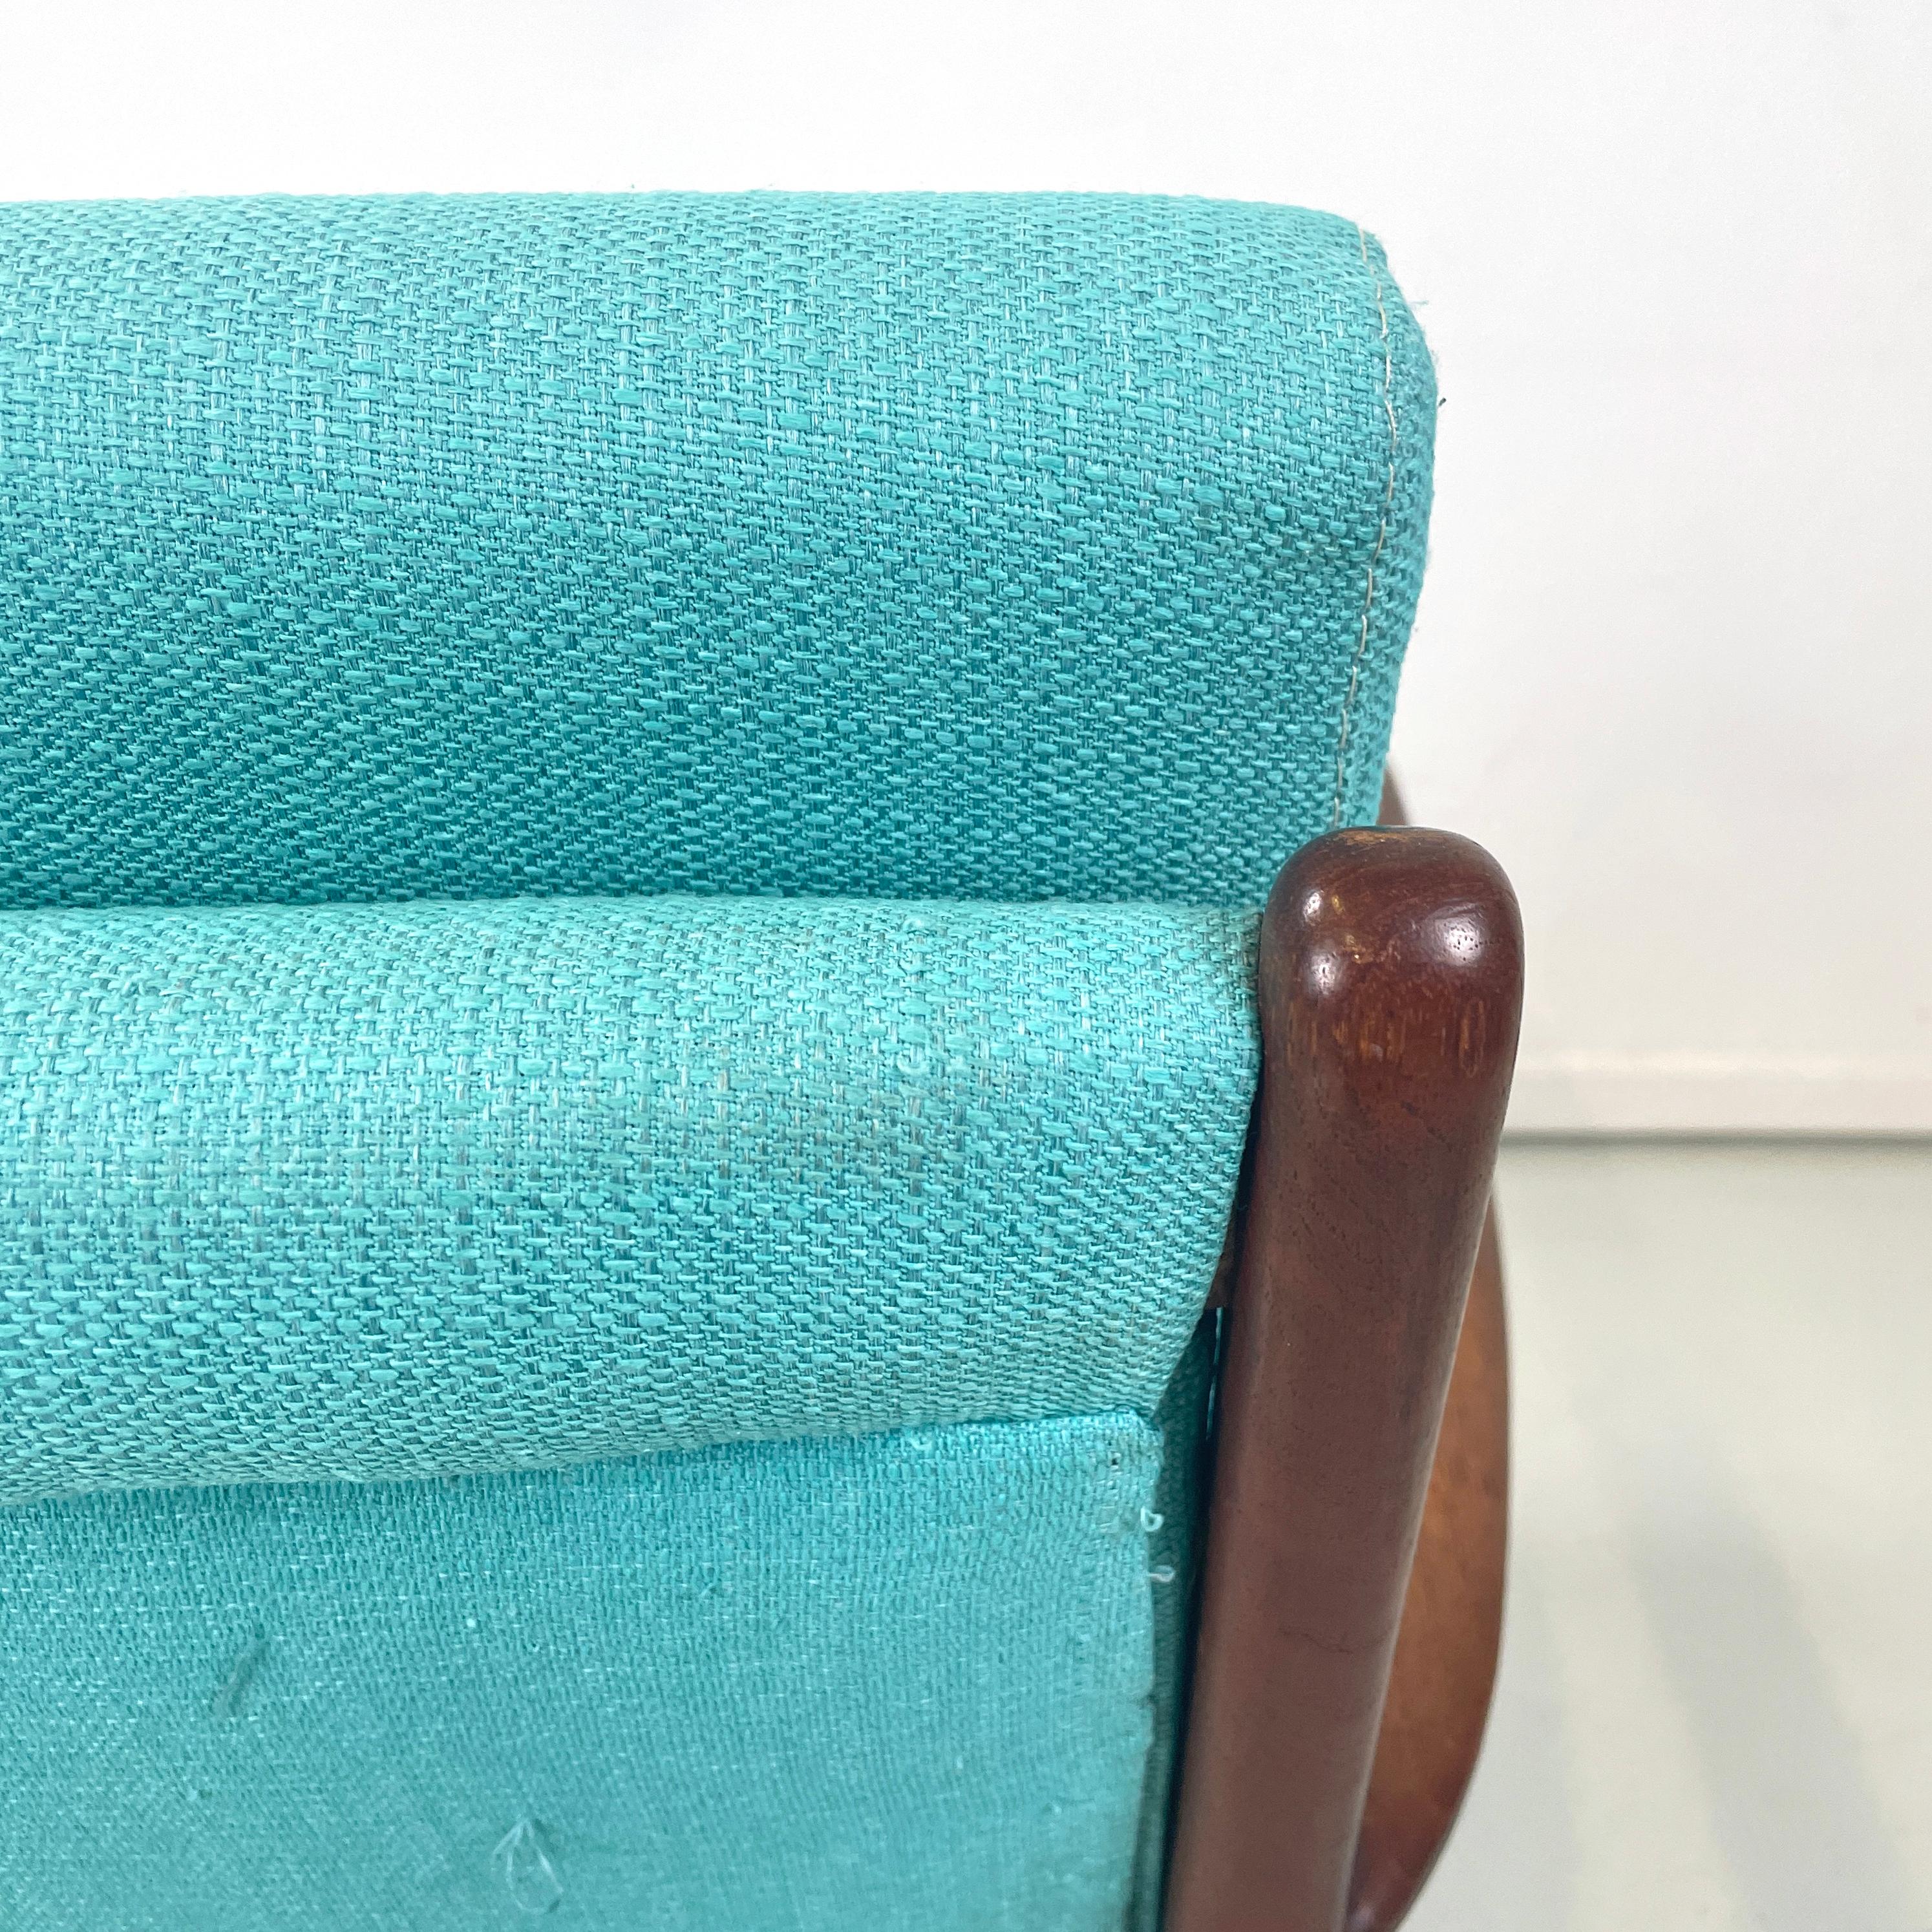 European mid-century modern Armchairs in light blue fabric and wood, 1960s For Sale 7